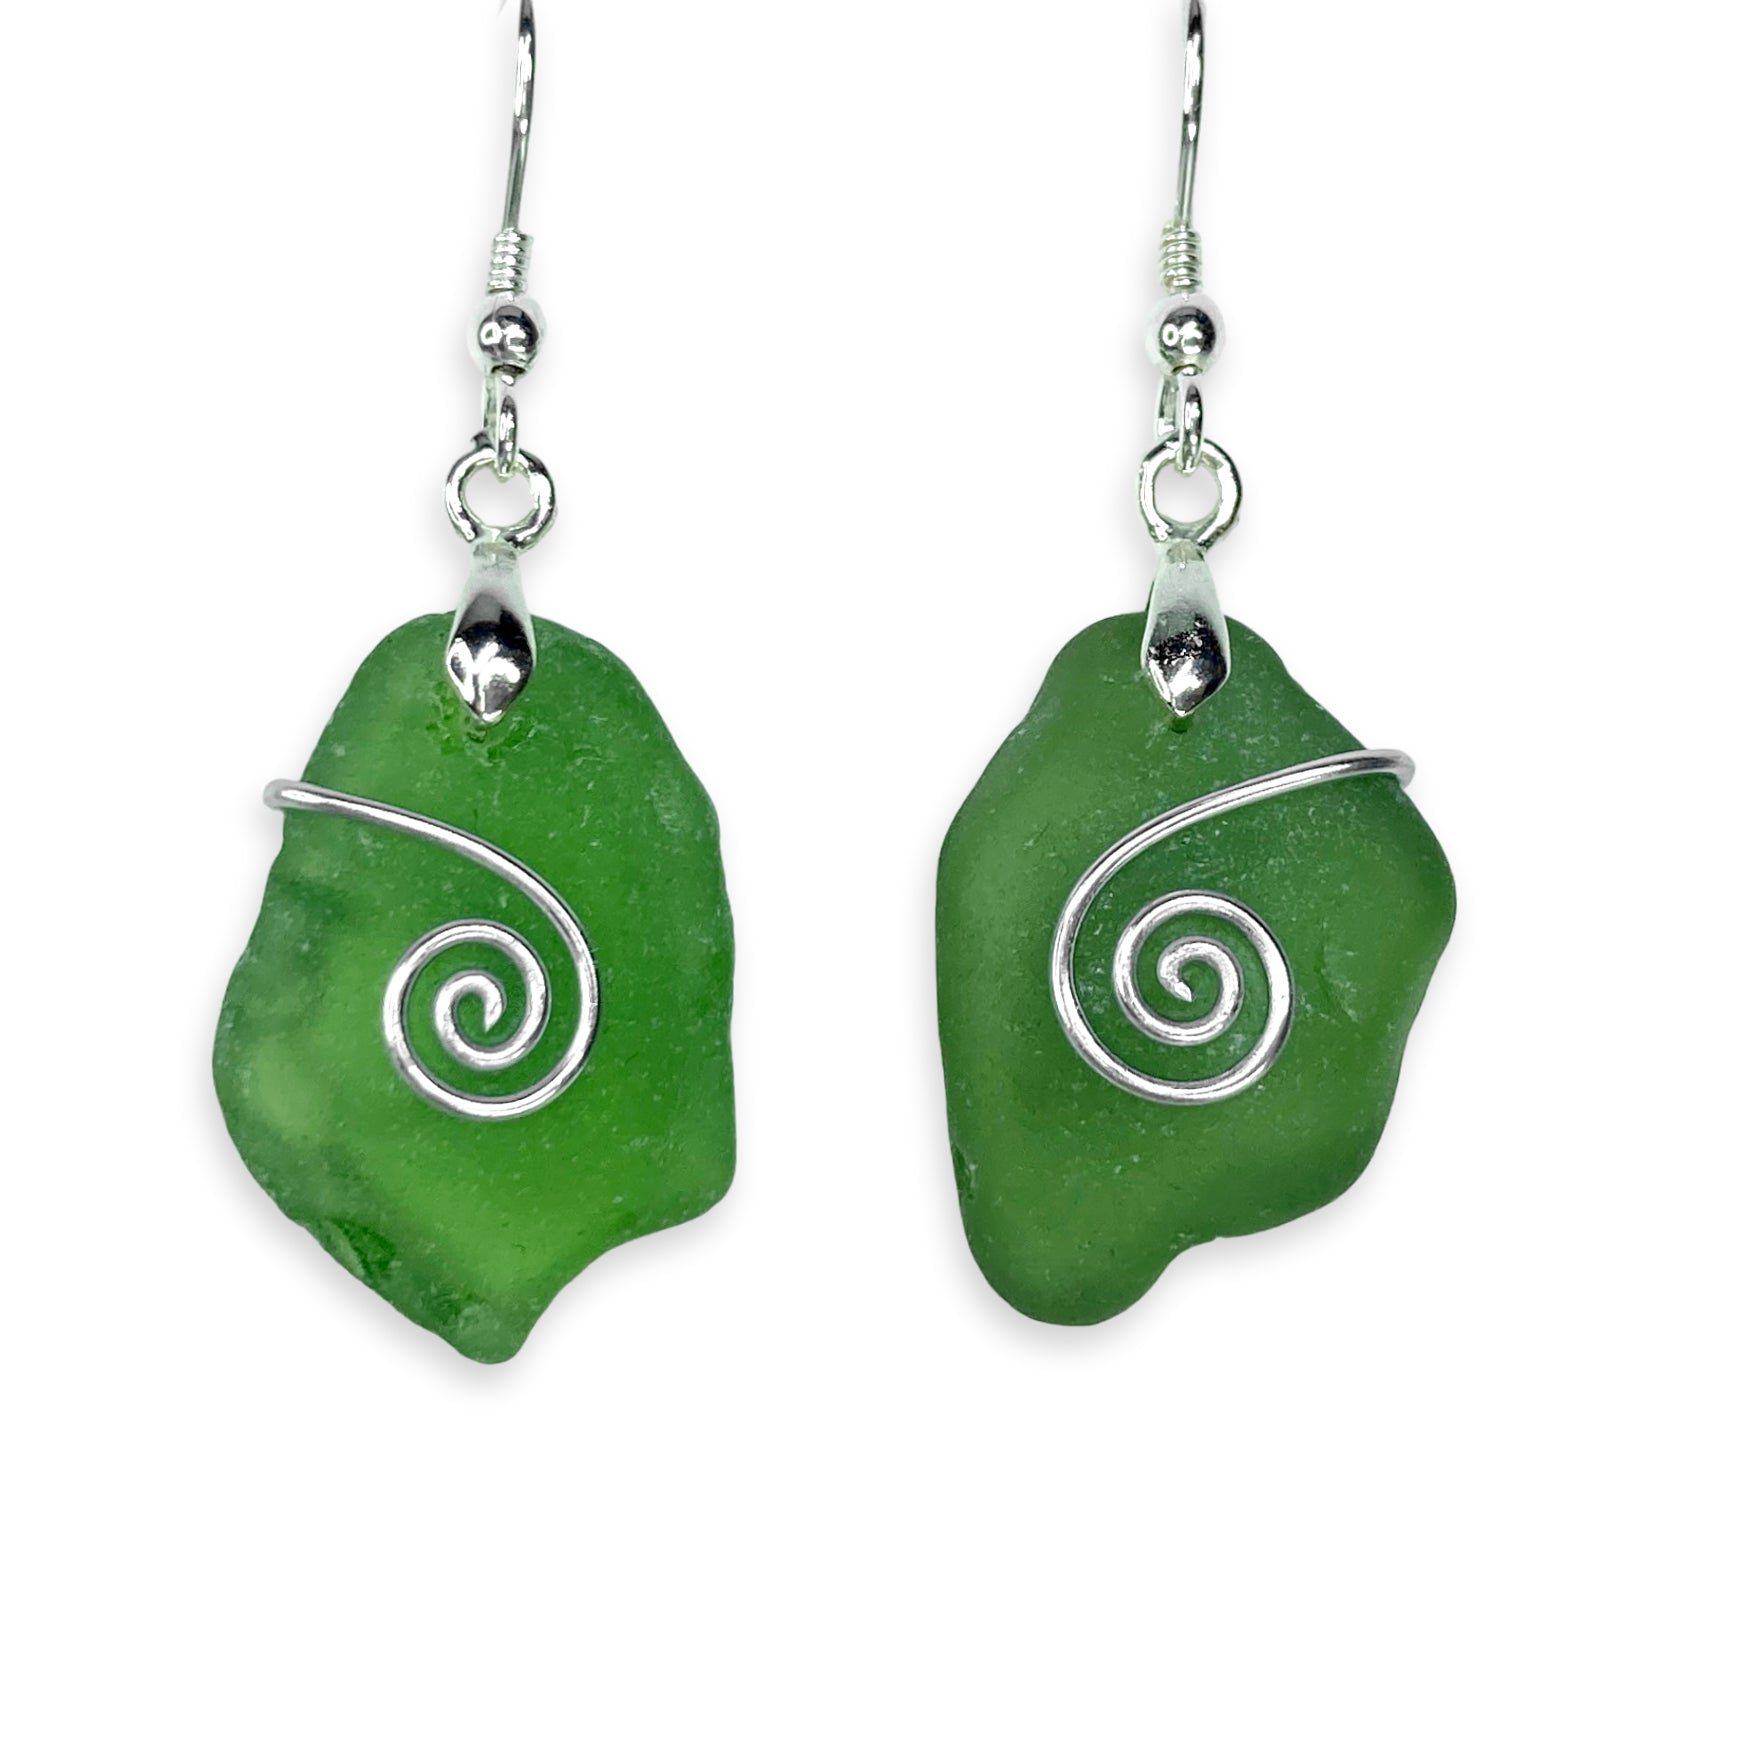 Sea Glass Earrings - Olive Green Celtic Silver Wire Wrapped Jewellery - East Neuk Beach Crafts